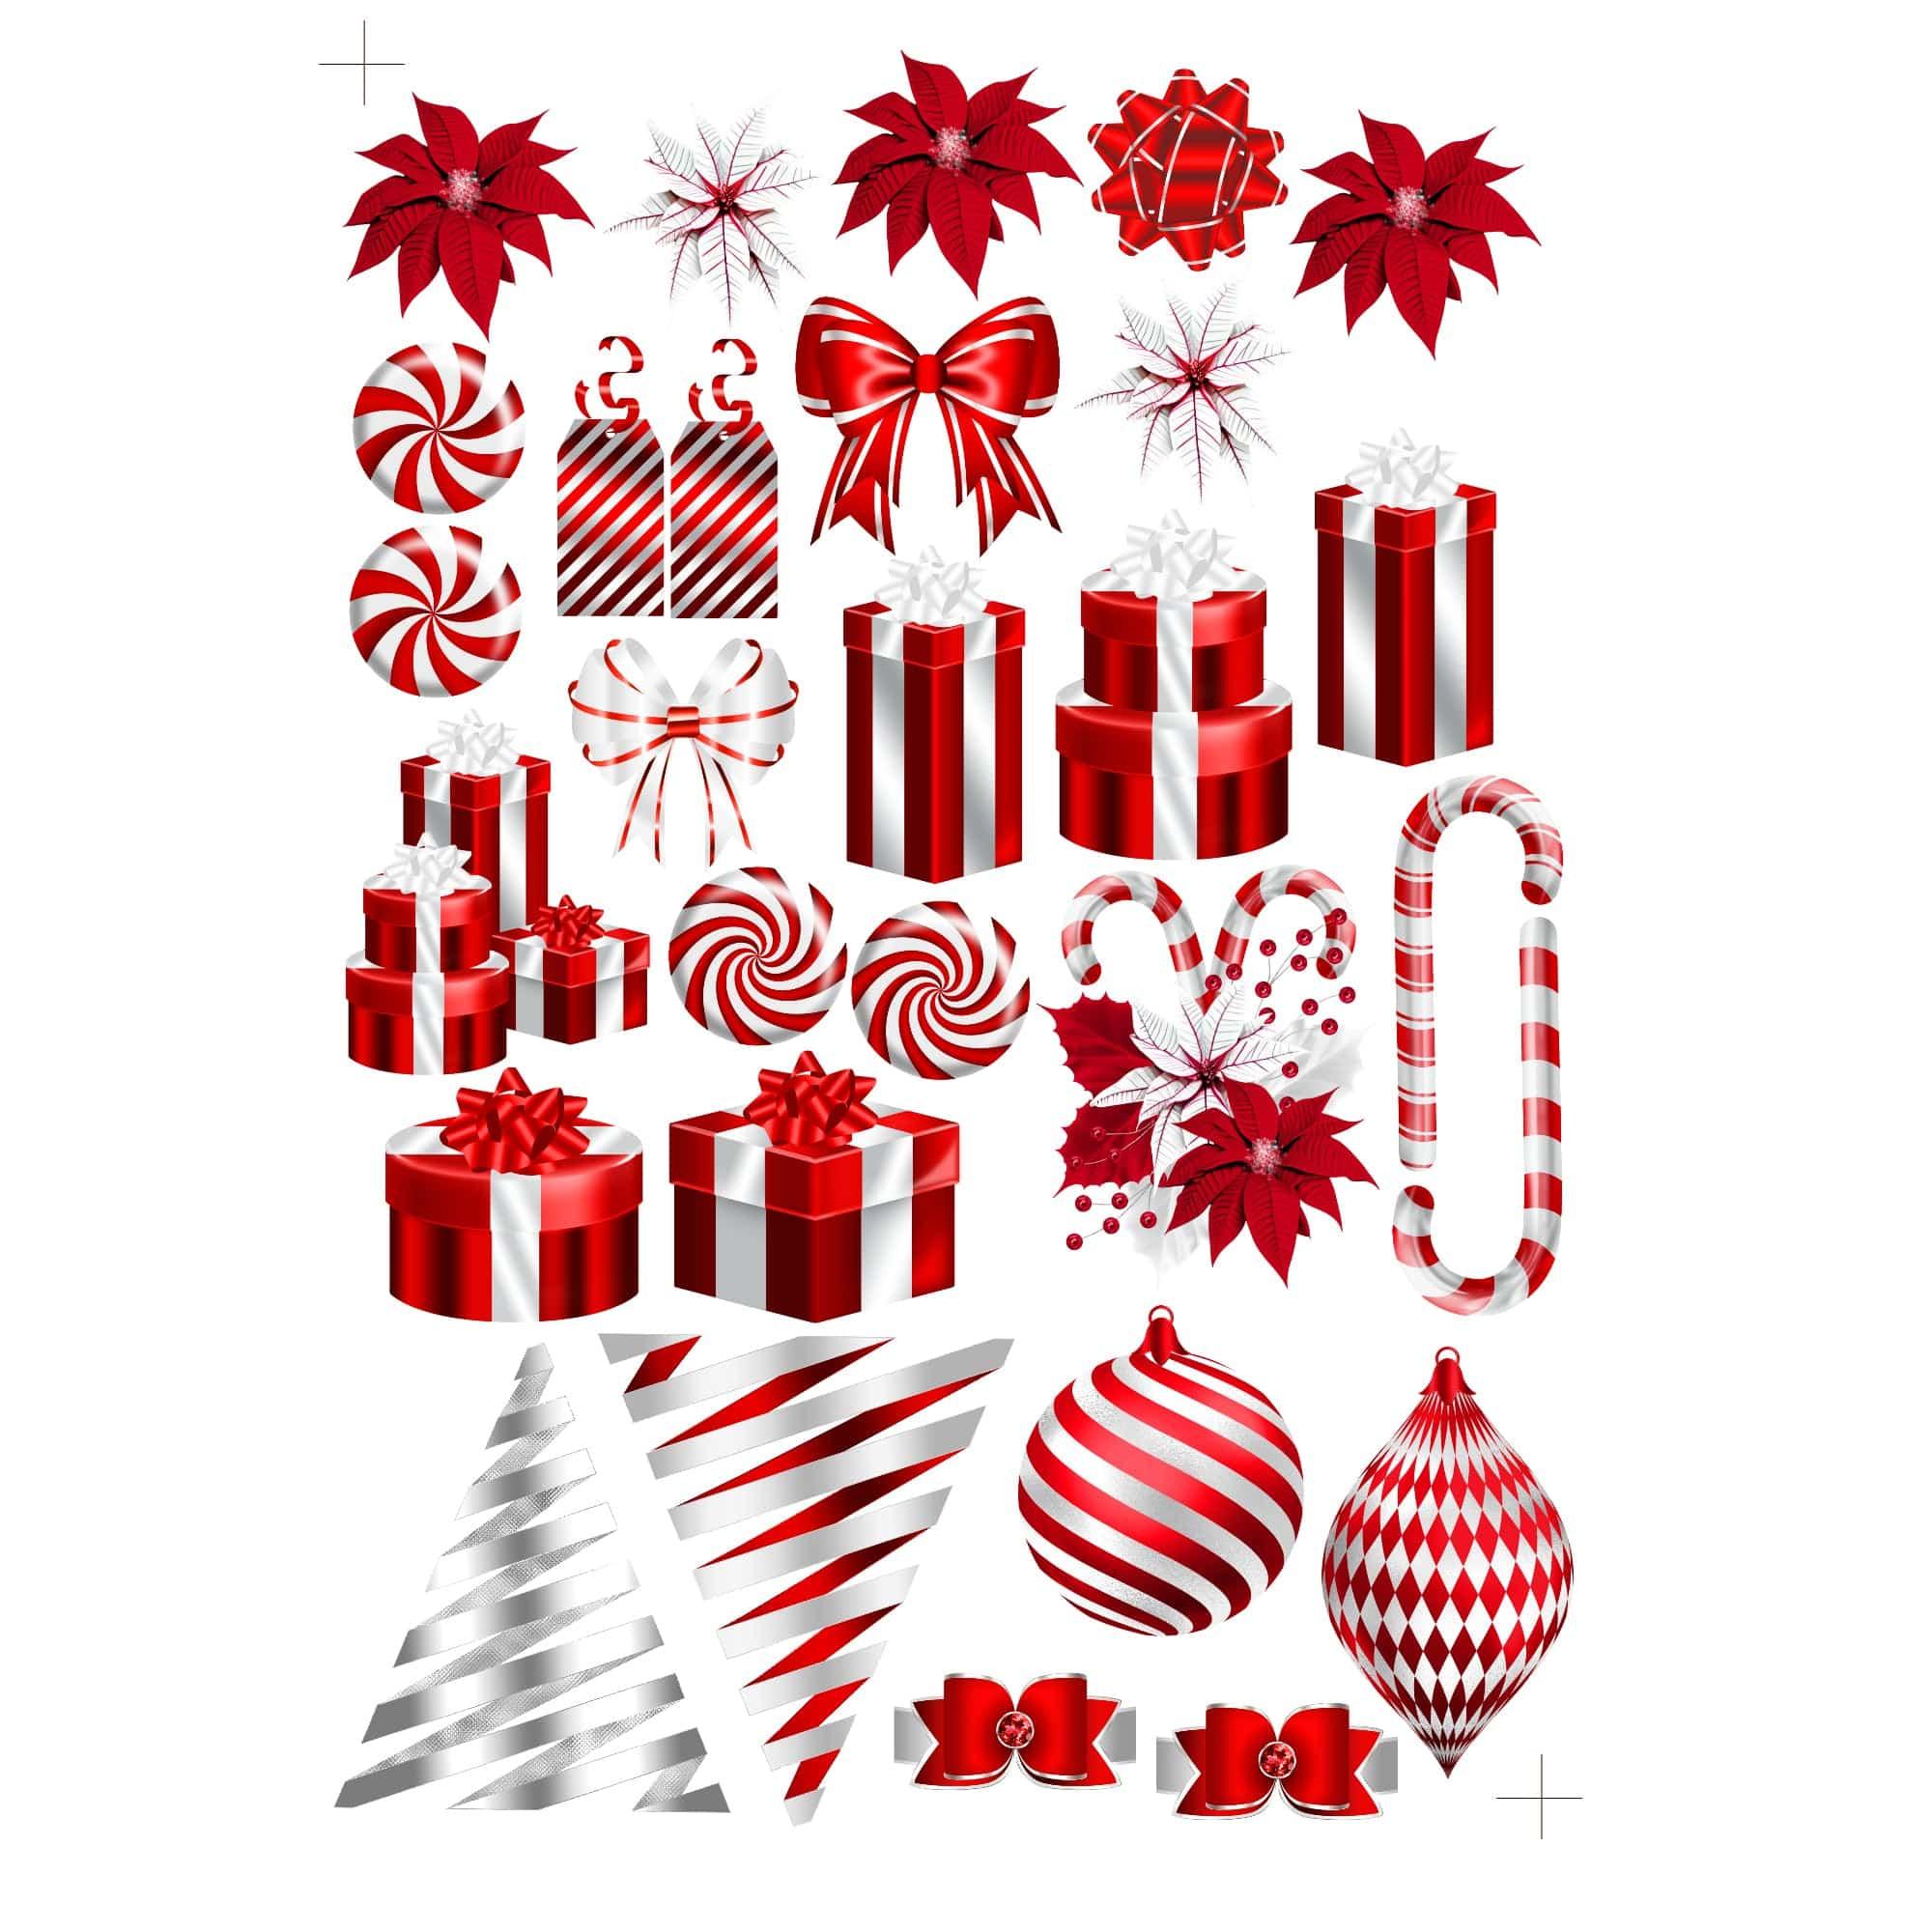 Peppermint Christmas Collection 12 x 12 Scrapbook Paper & Embellishment Kit by SSC Designs - Scrapbook Supply Companies